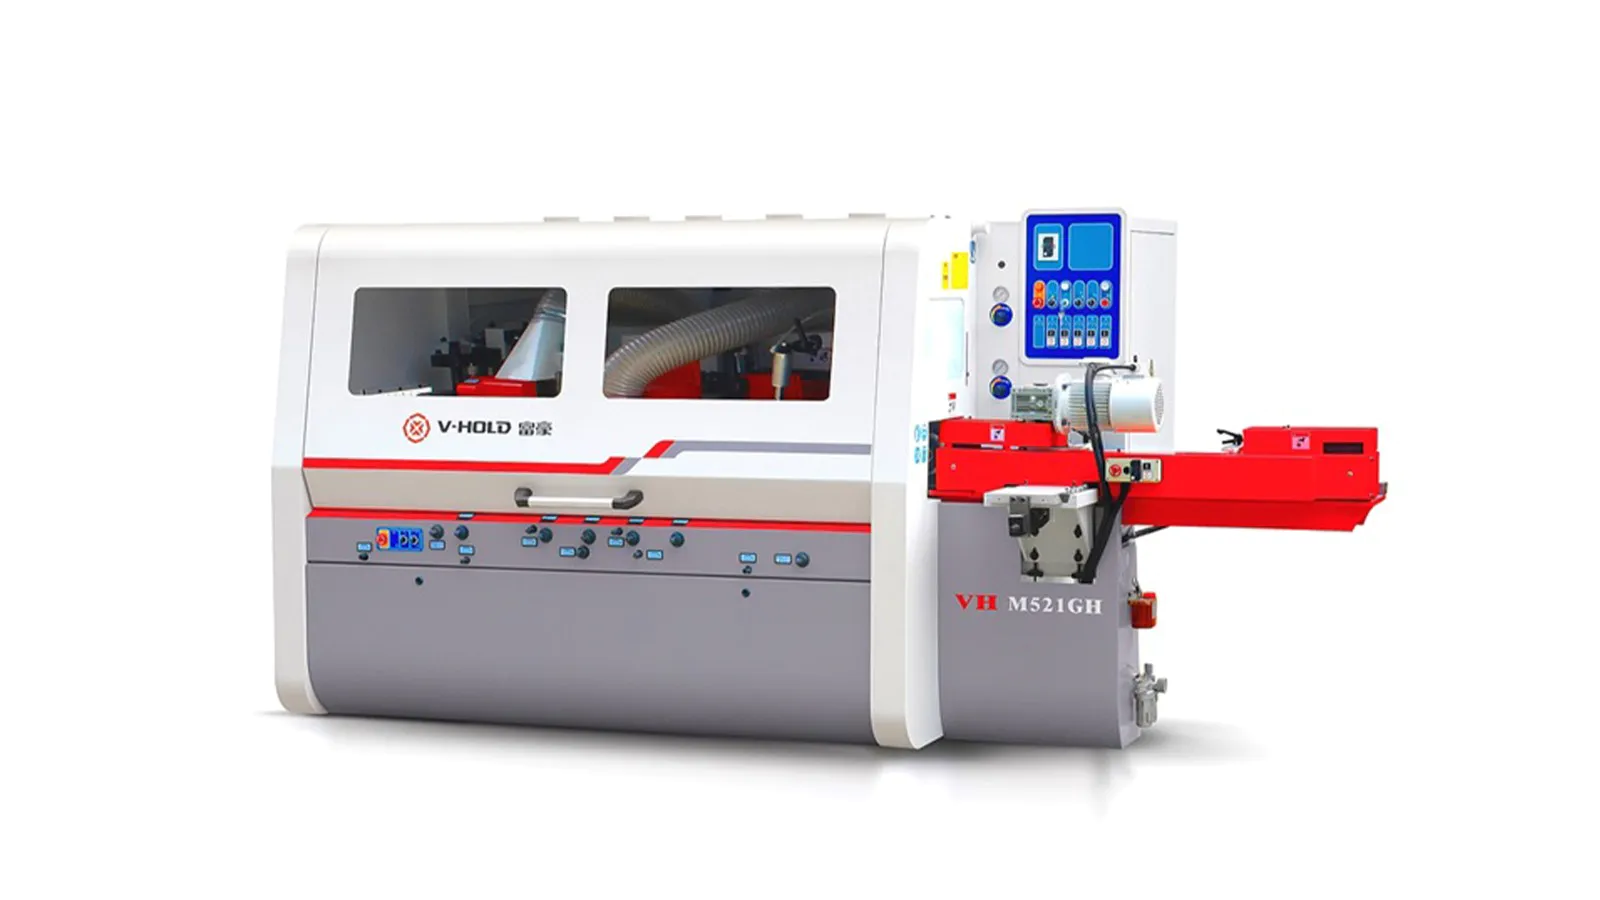 V-hold Machinery Quality 4 sided moulder for sale maker for plywood